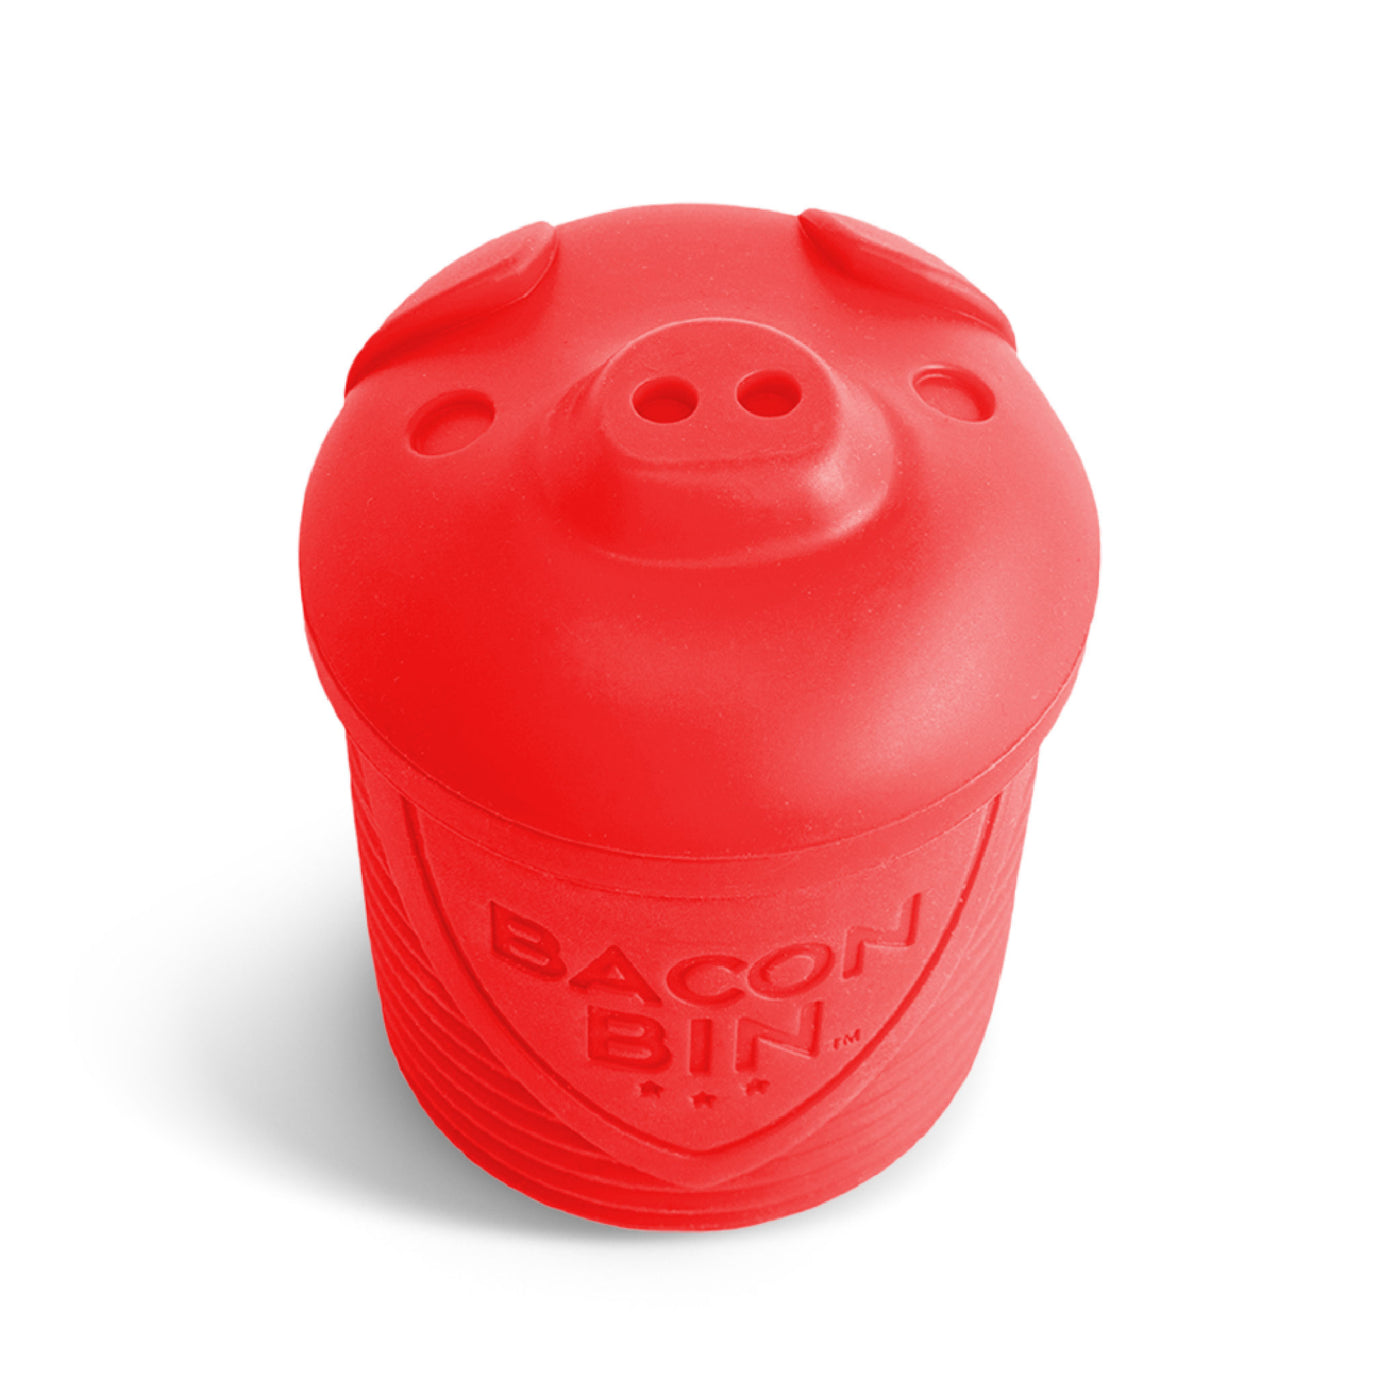 Wholesale Bacon Bin Grease Holder for your store